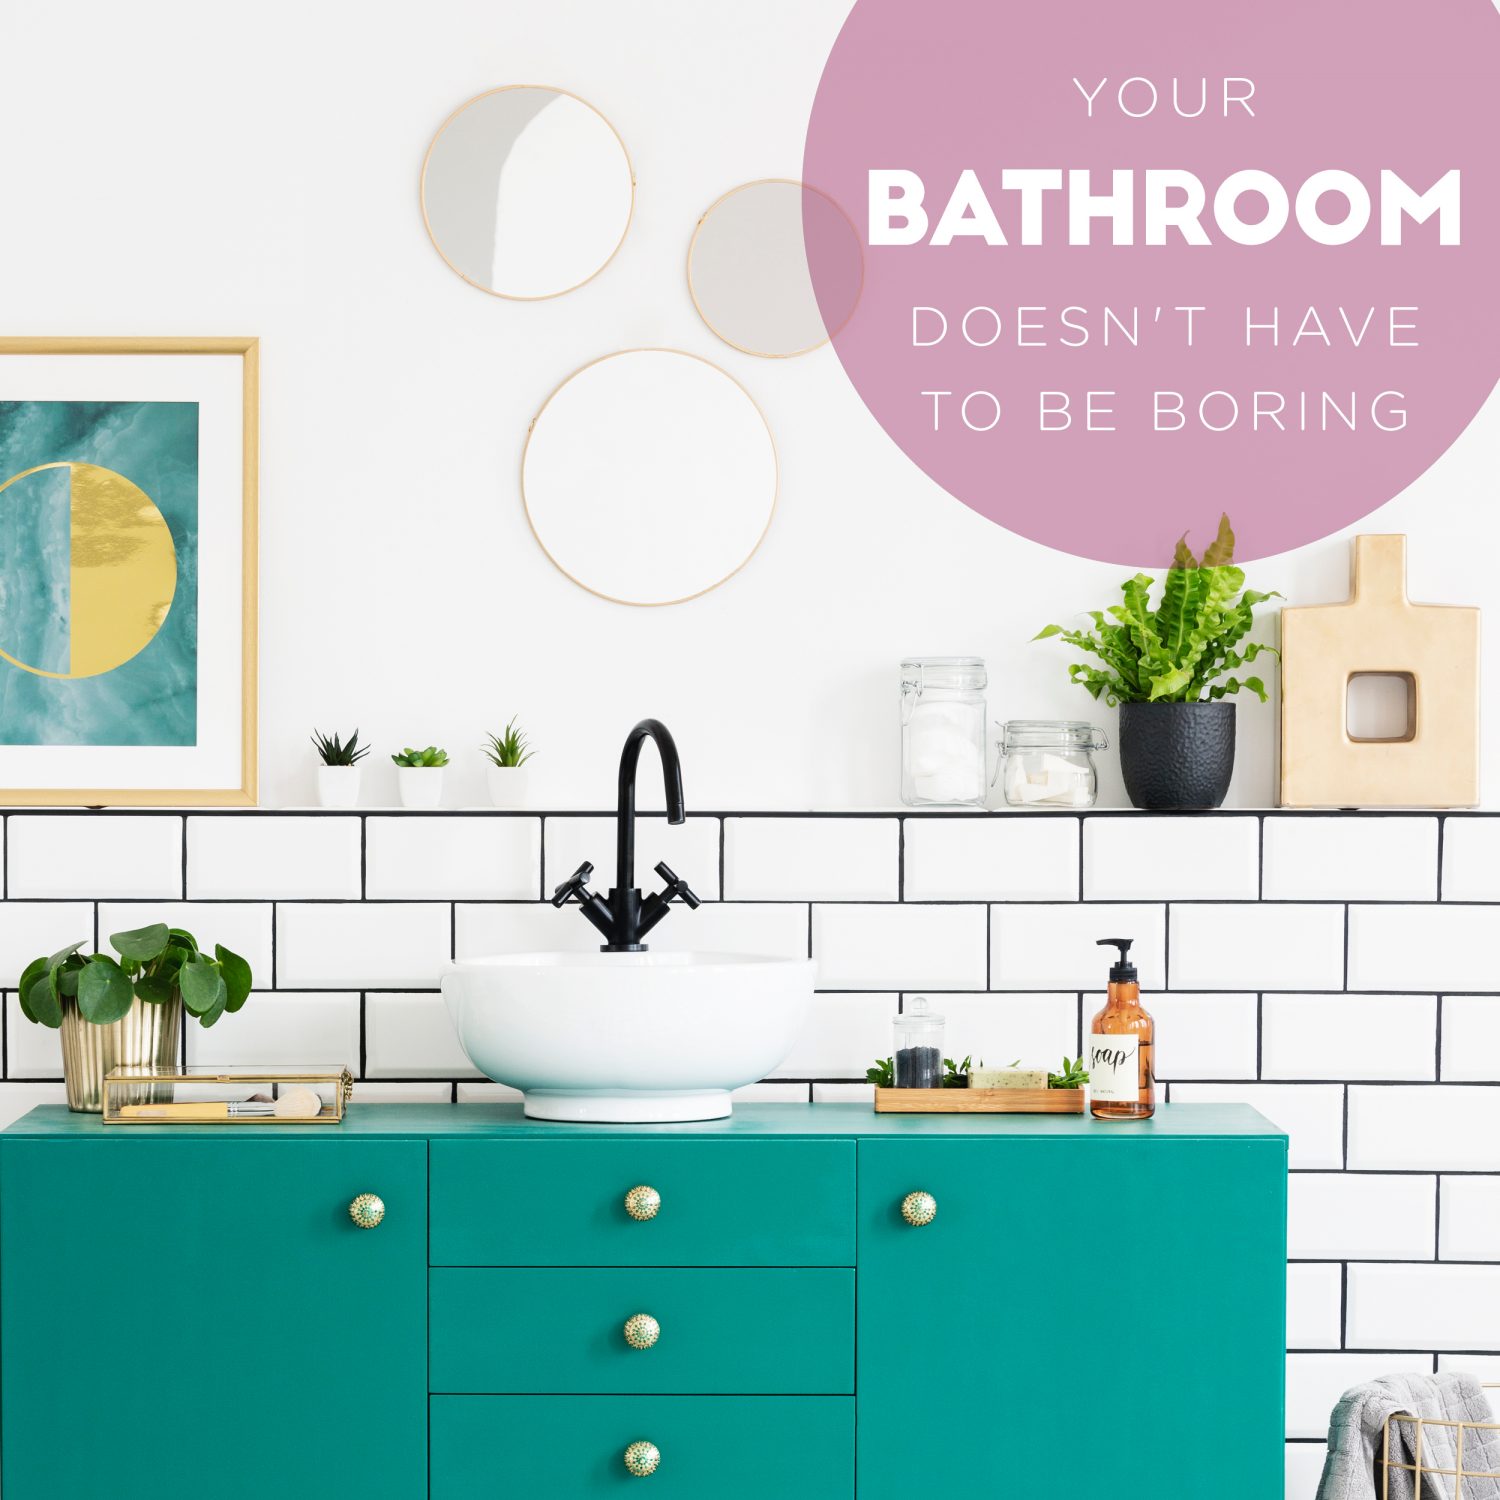 Bathrooms Don't Have To Be Boring